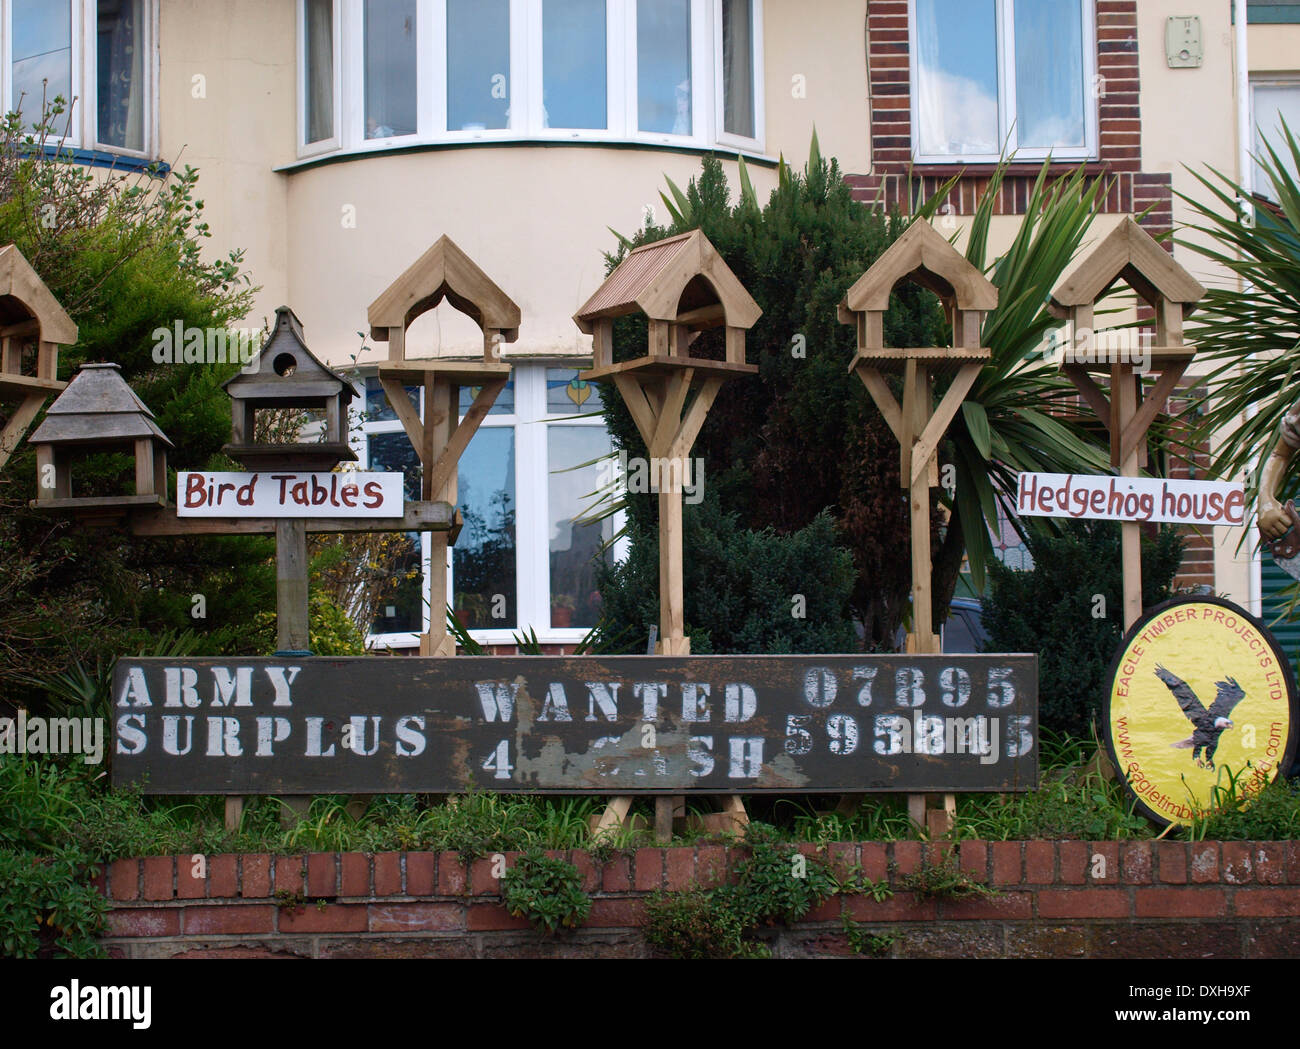 Bird tables being sold from front garden of a house, Paignton, Devon, UK Stock Photo